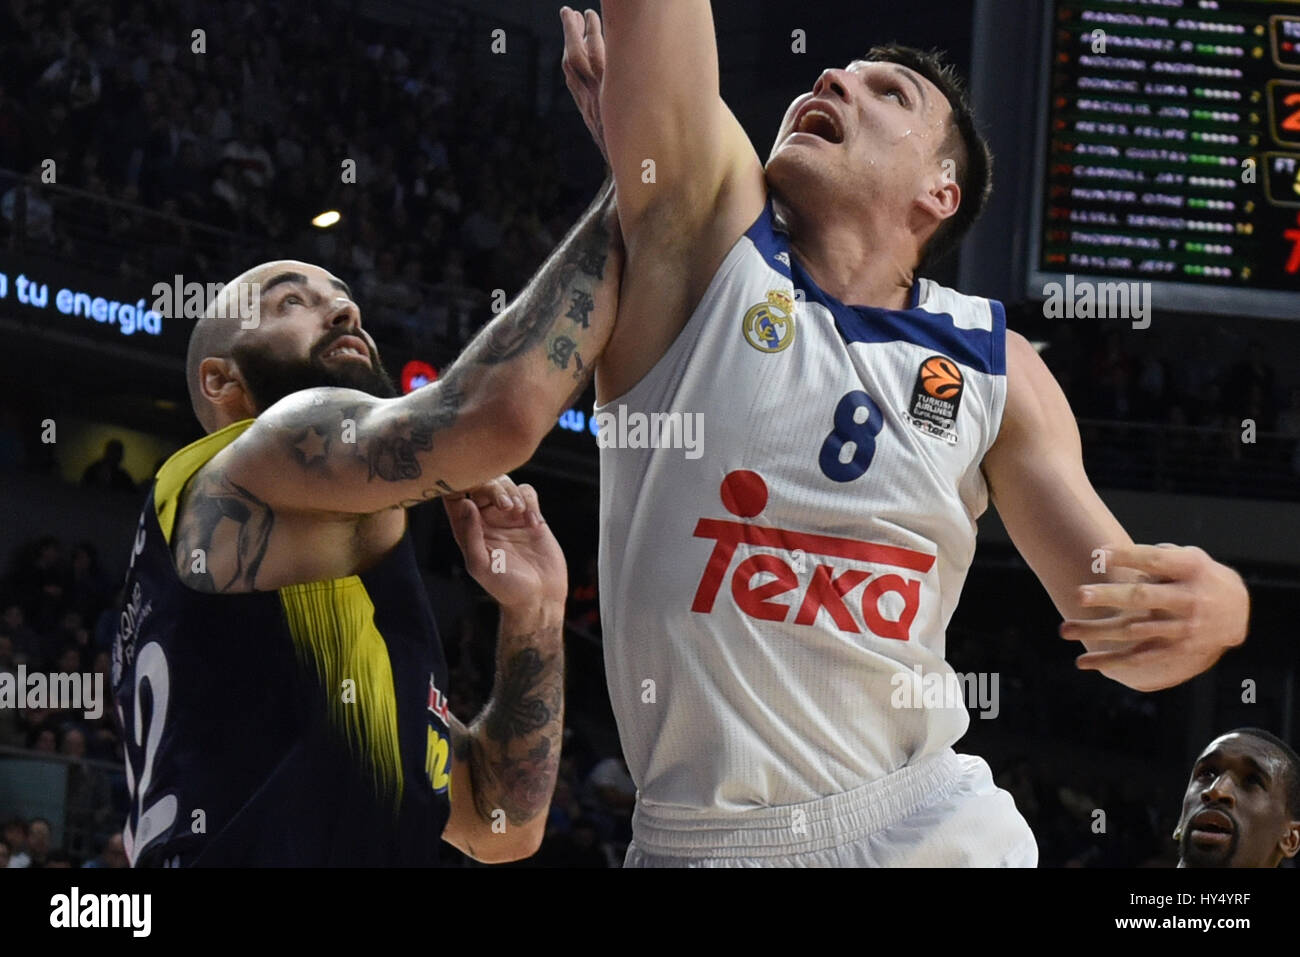 Madrid, Spain. 31st Mar, 2017. Jonas Maciulis (right) #8 of Real Madrid in action during the Euroleague basketball match between Real Madrid and Fenerbahce Istanbul at WiZink center in Madrid. Credit: Jorge Sanz/Pacific Press/Alamy Live News Stock Photo